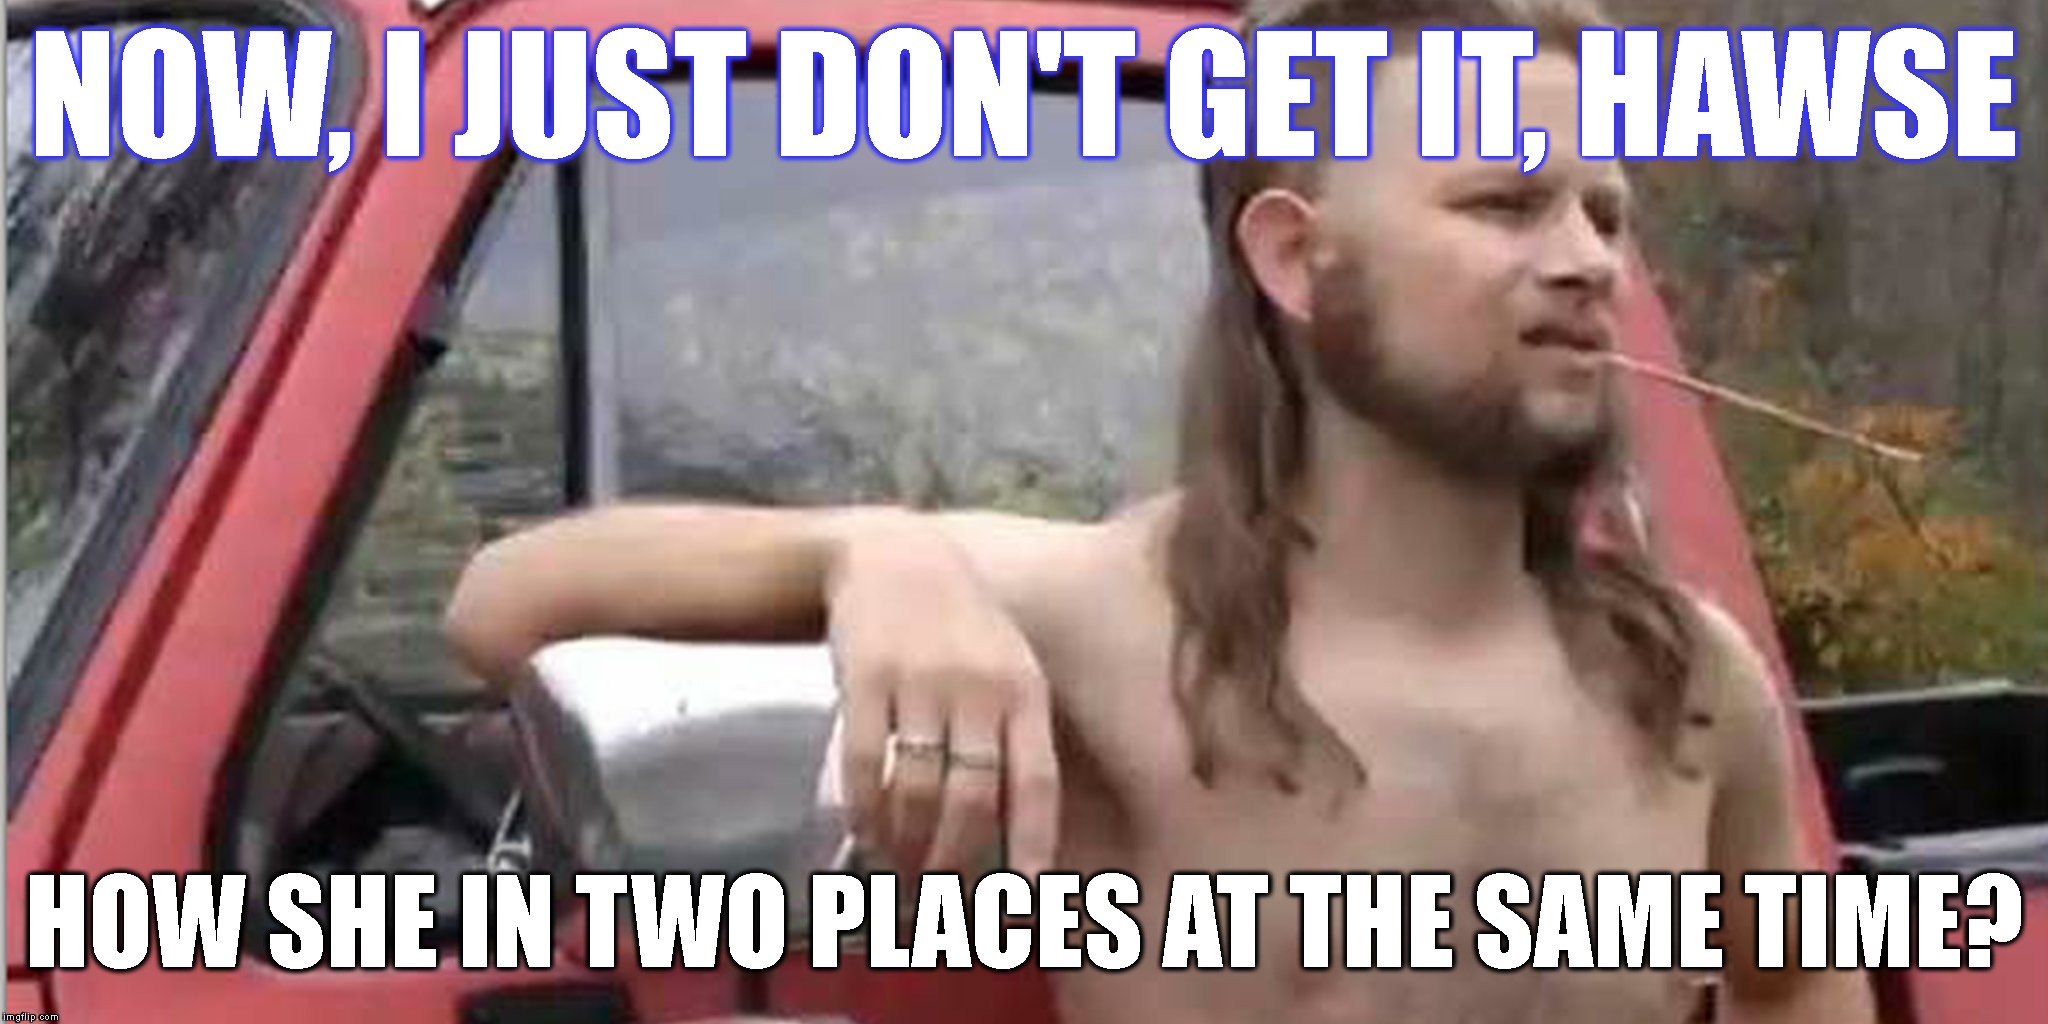 Redneck With A Truck | NOW, I JUST DON'T GET IT, HAWSE HOW SHE IN TWO PLACES AT THE SAME TIME? | image tagged in redneck with a truck | made w/ Imgflip meme maker